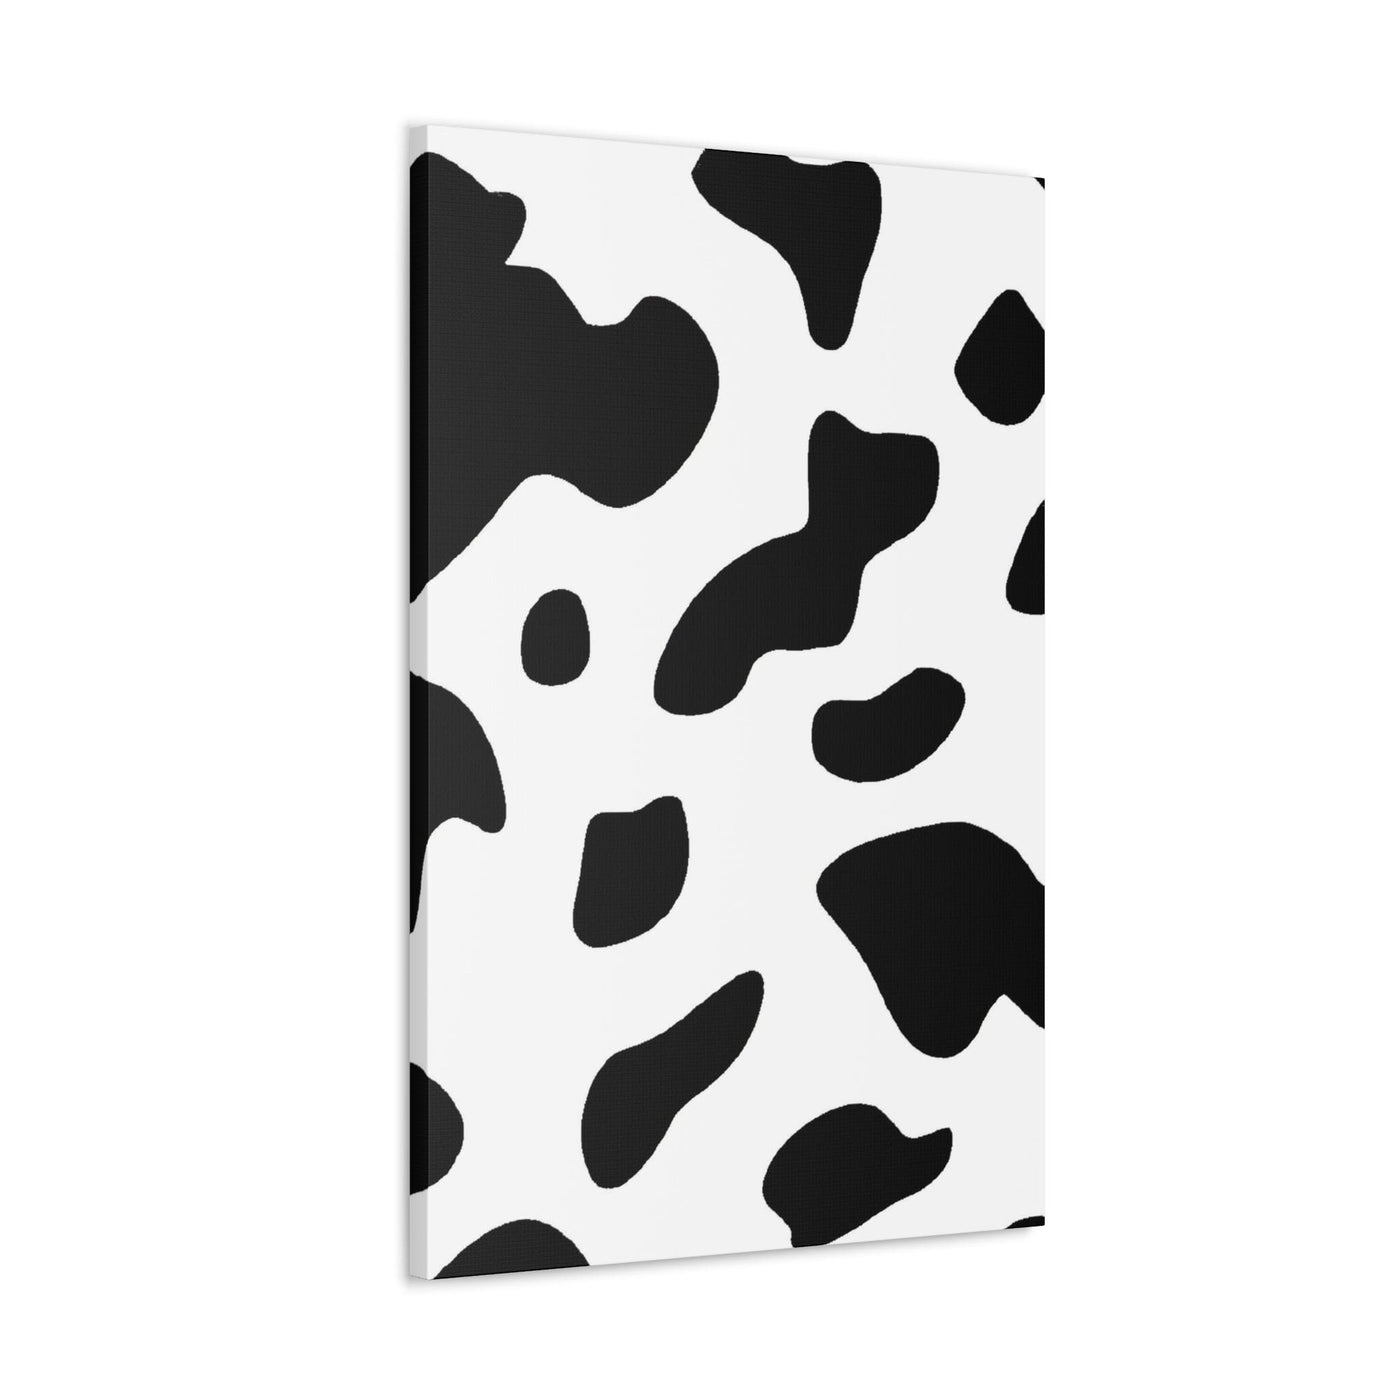 Wall Art Decor Canvas Print Artwork Black And White Abstract Cow Print Pattern